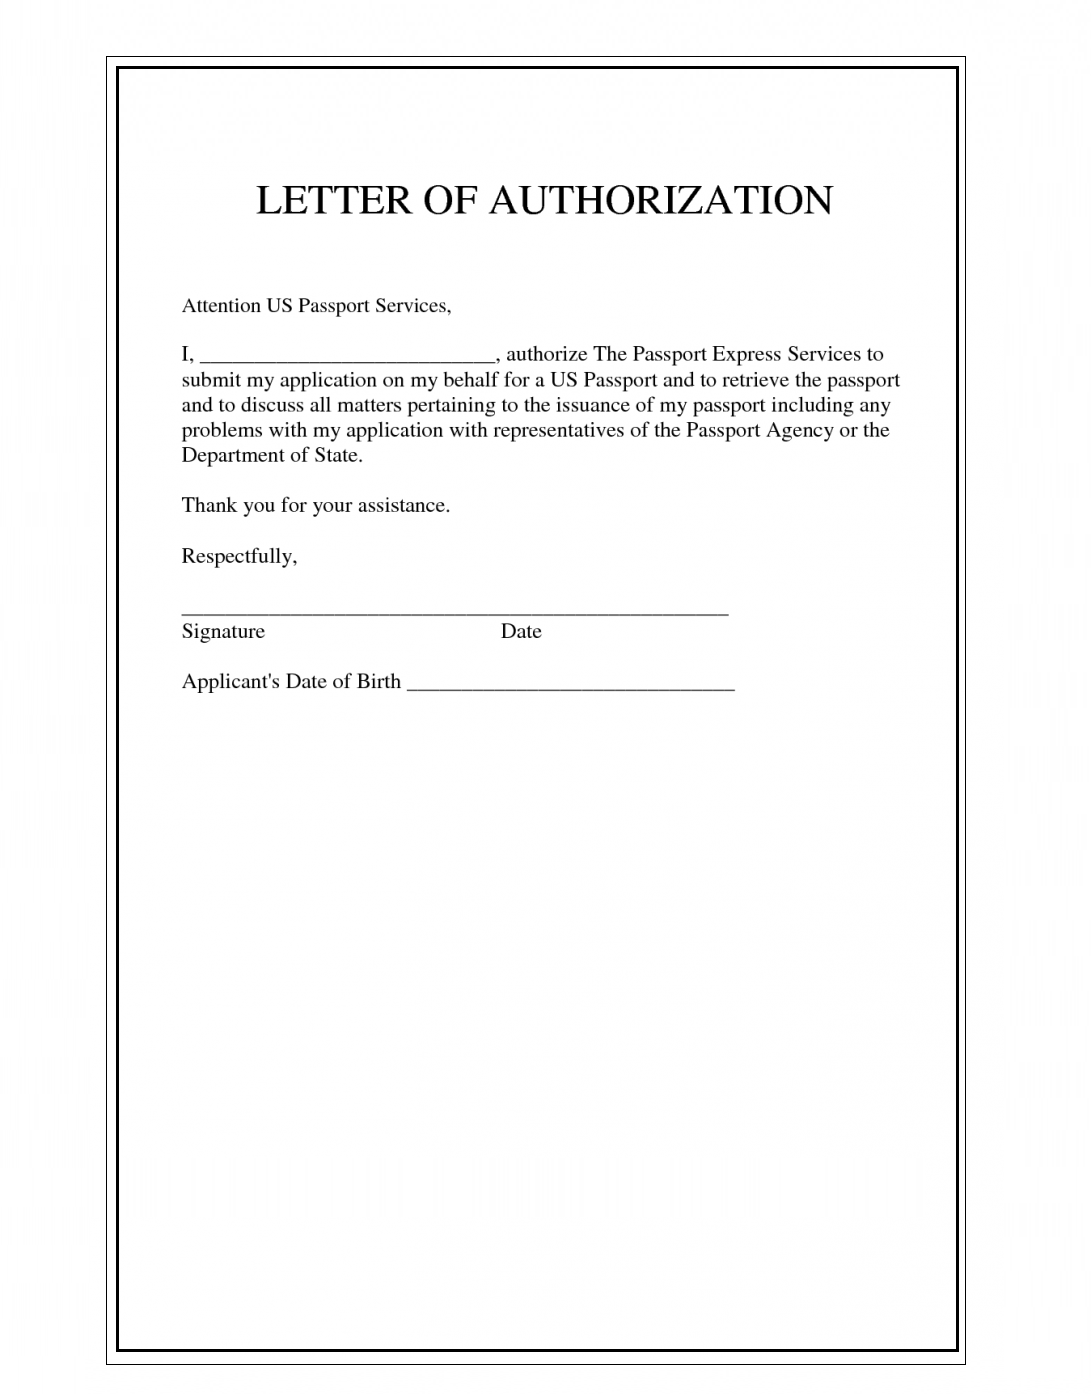 Example of Authorization Letter